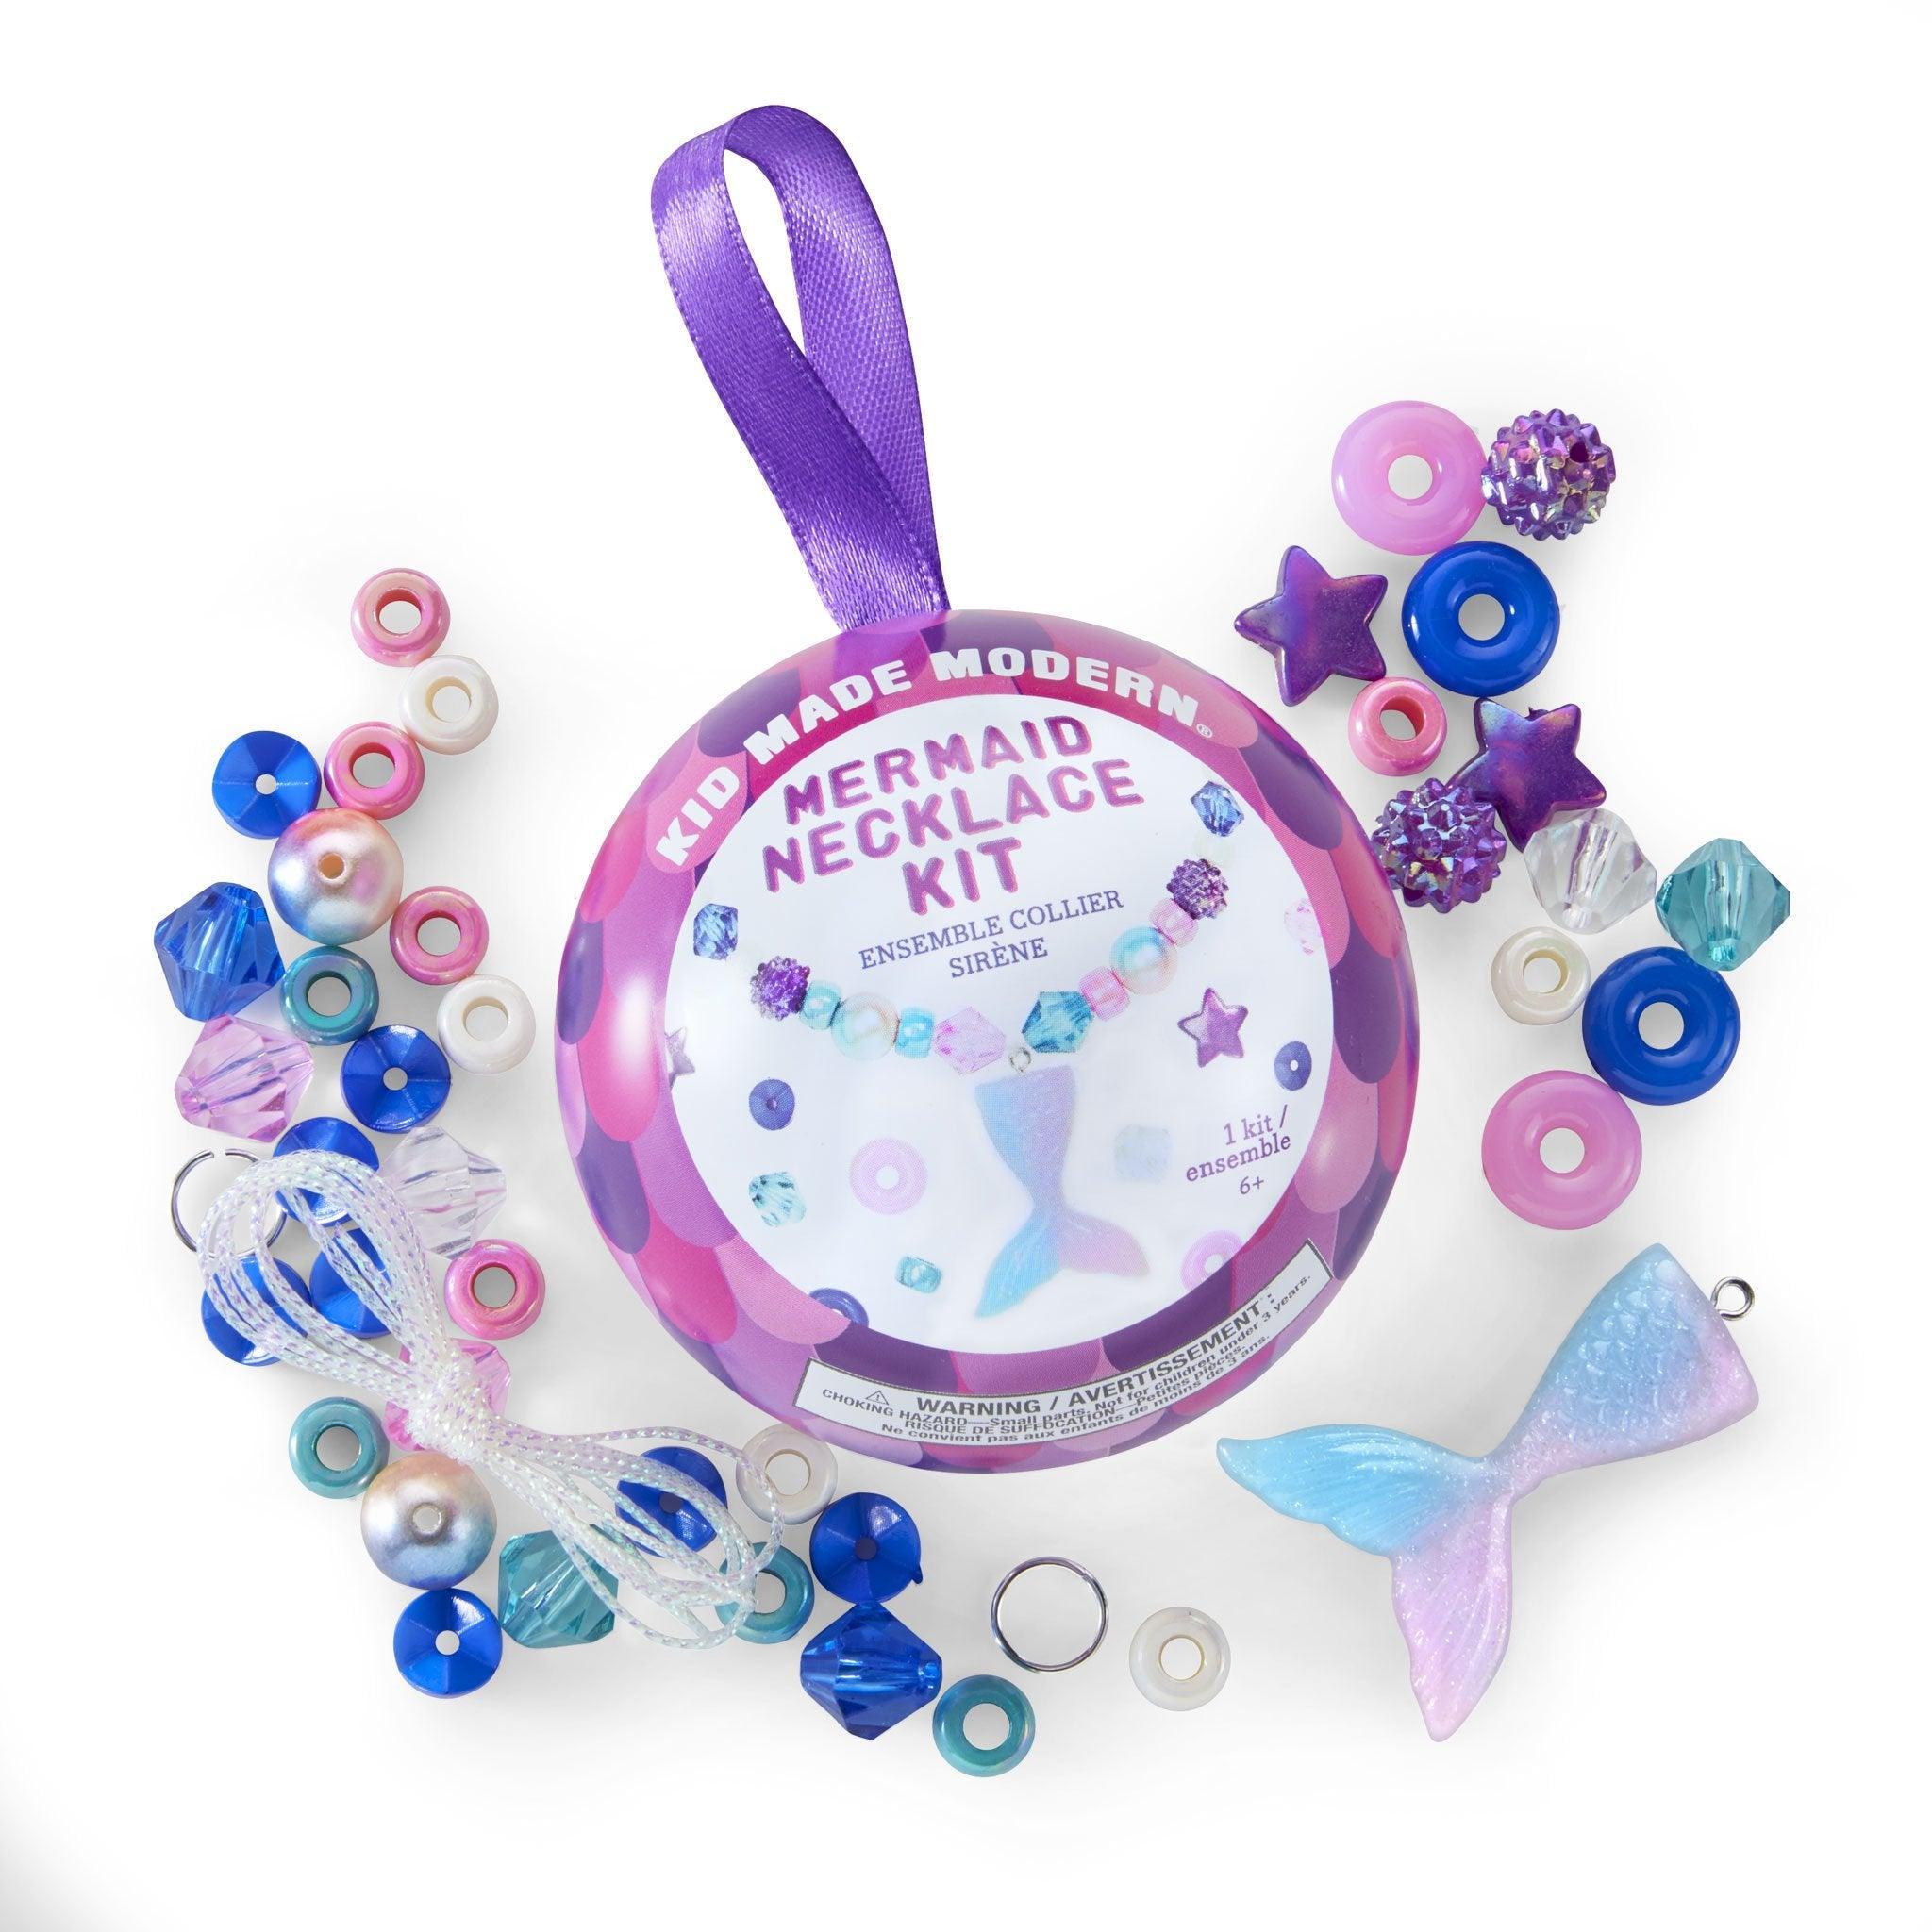 Mermaid Necklace Kit - Why and Whale